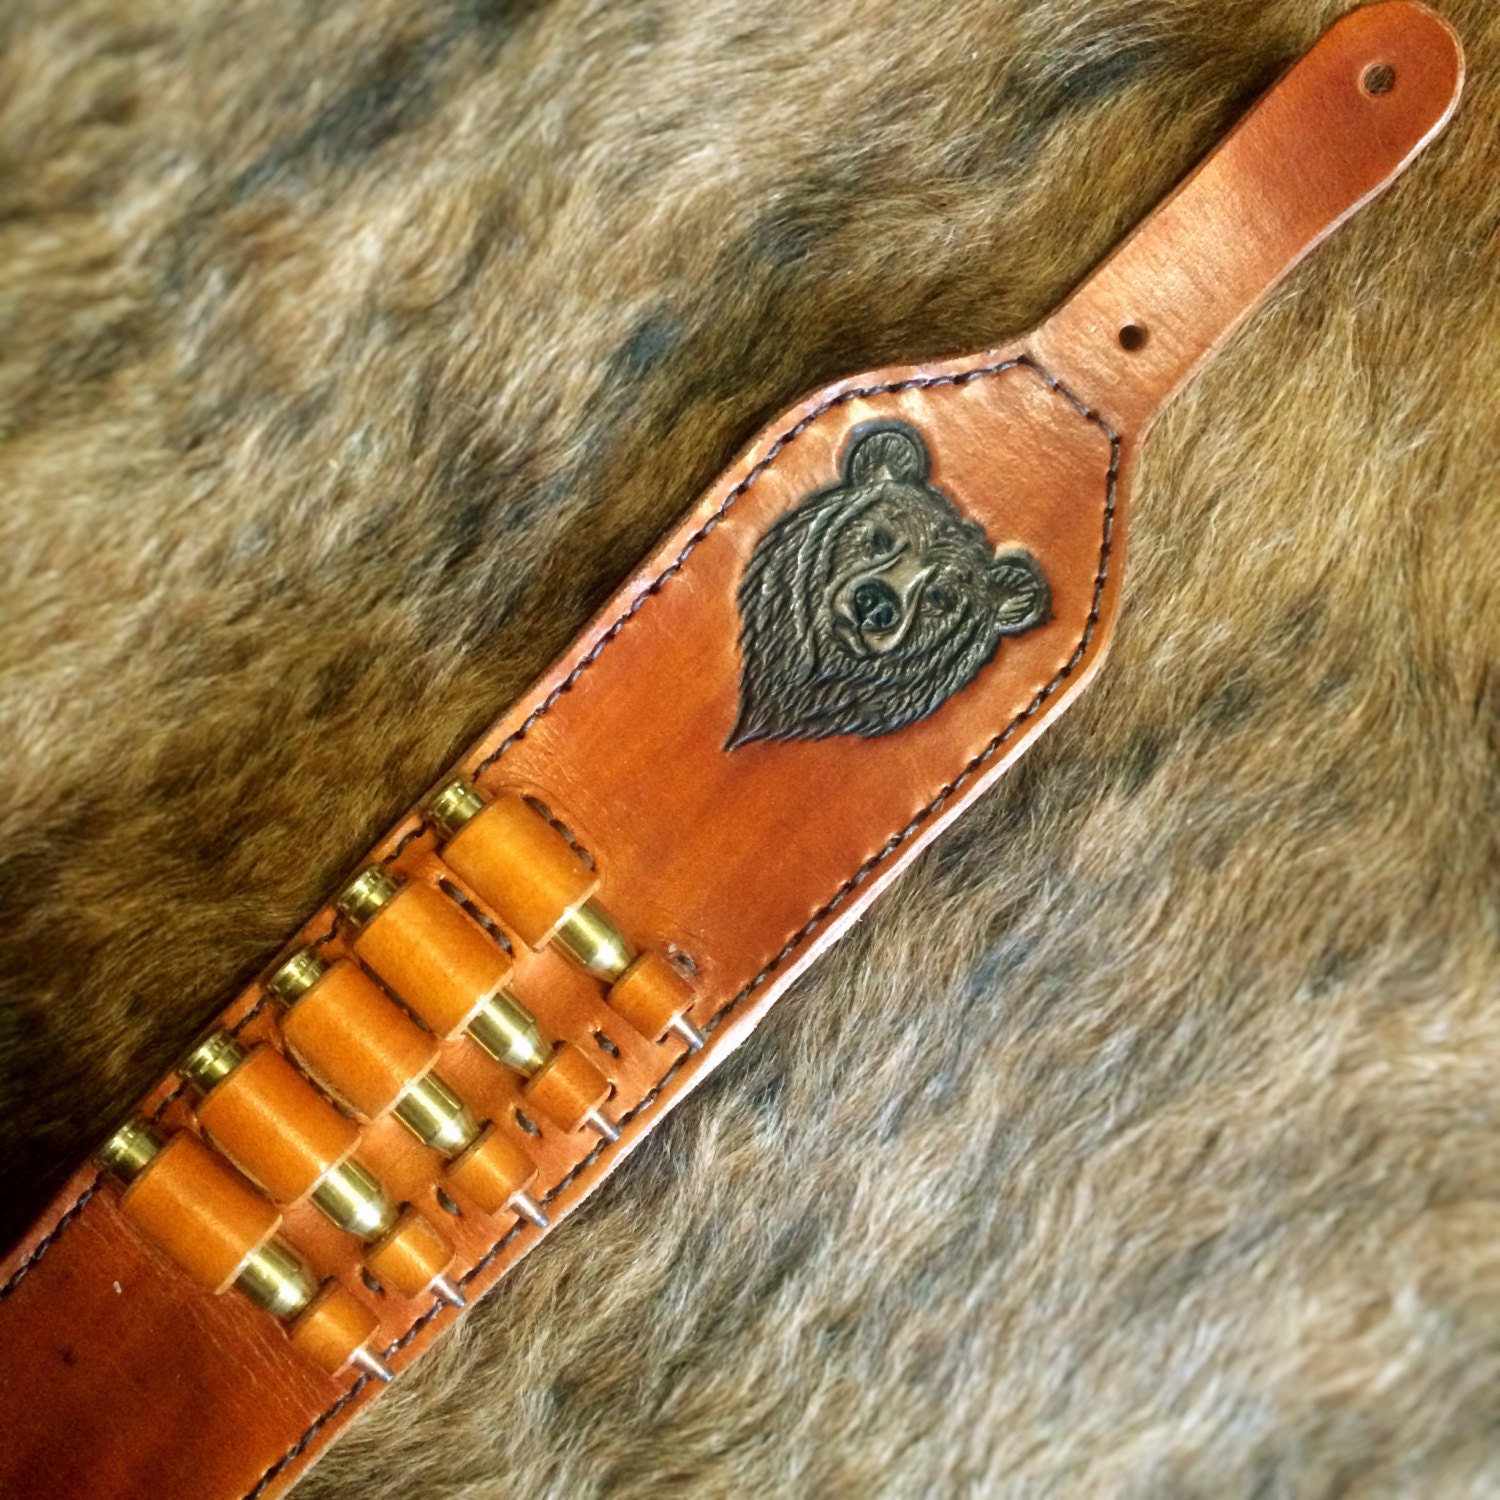 Padded Custom Leather Gun Sling with Black Bear Design and